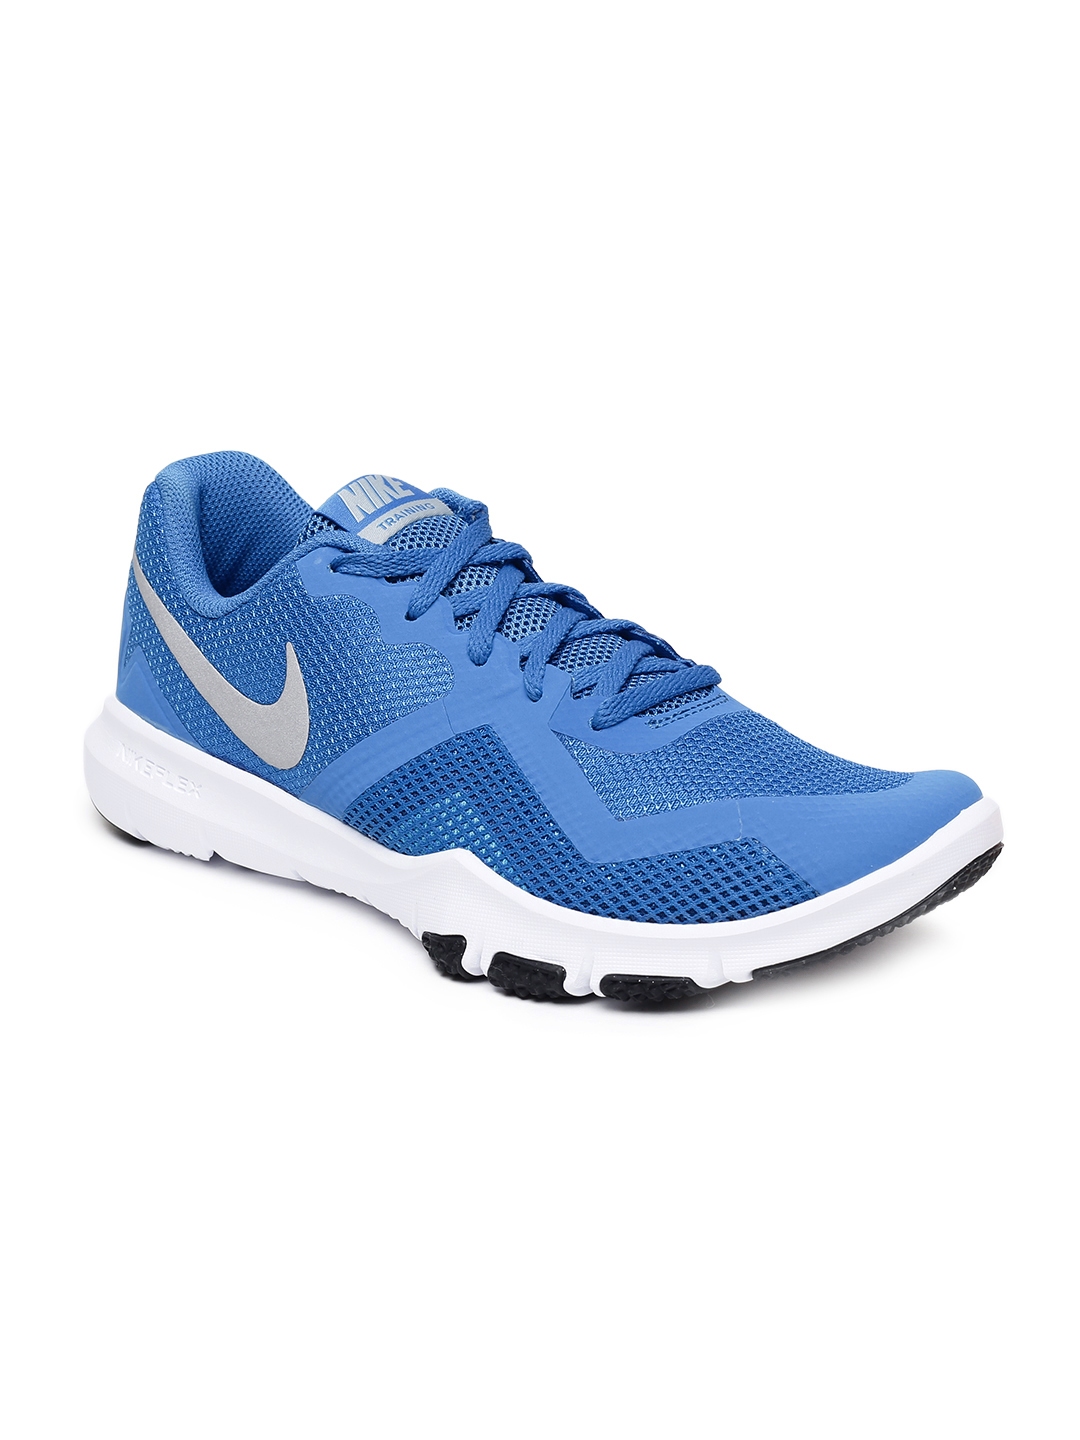 Buy Nike Men Blue Training Or Gym Shoes - Sports Shoes for Men 7487577 ...